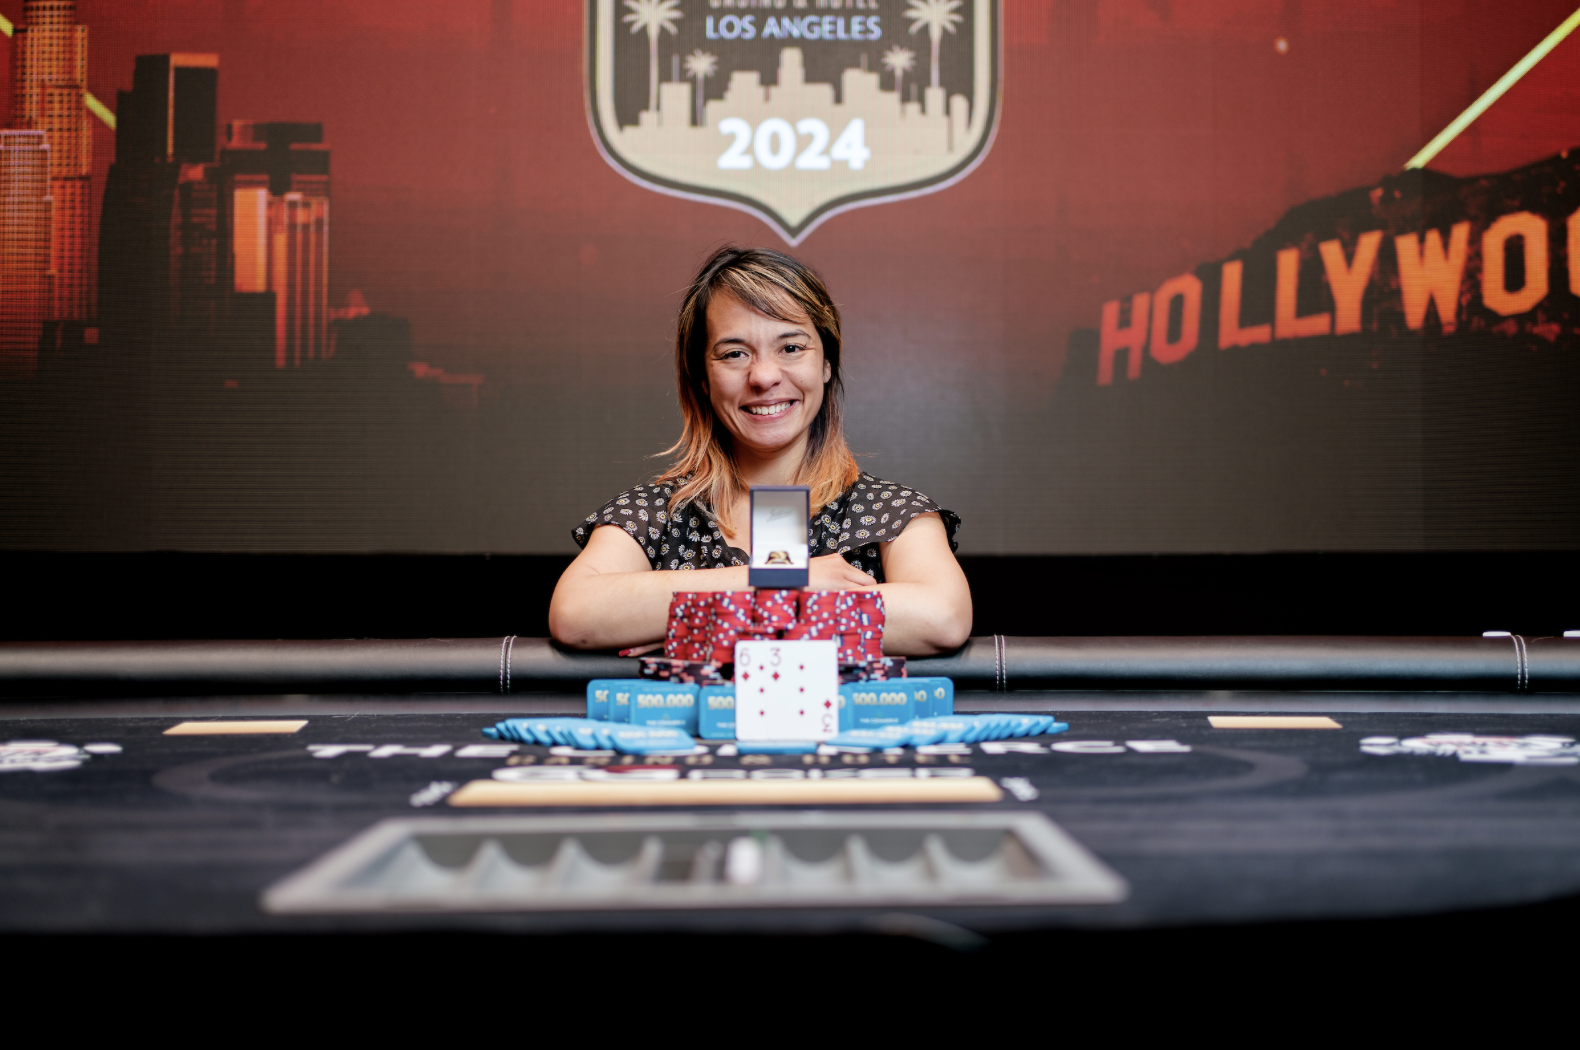 Jessica Vierling Tops Massive Field at WSOP Circuit Main Event in Los Angeles